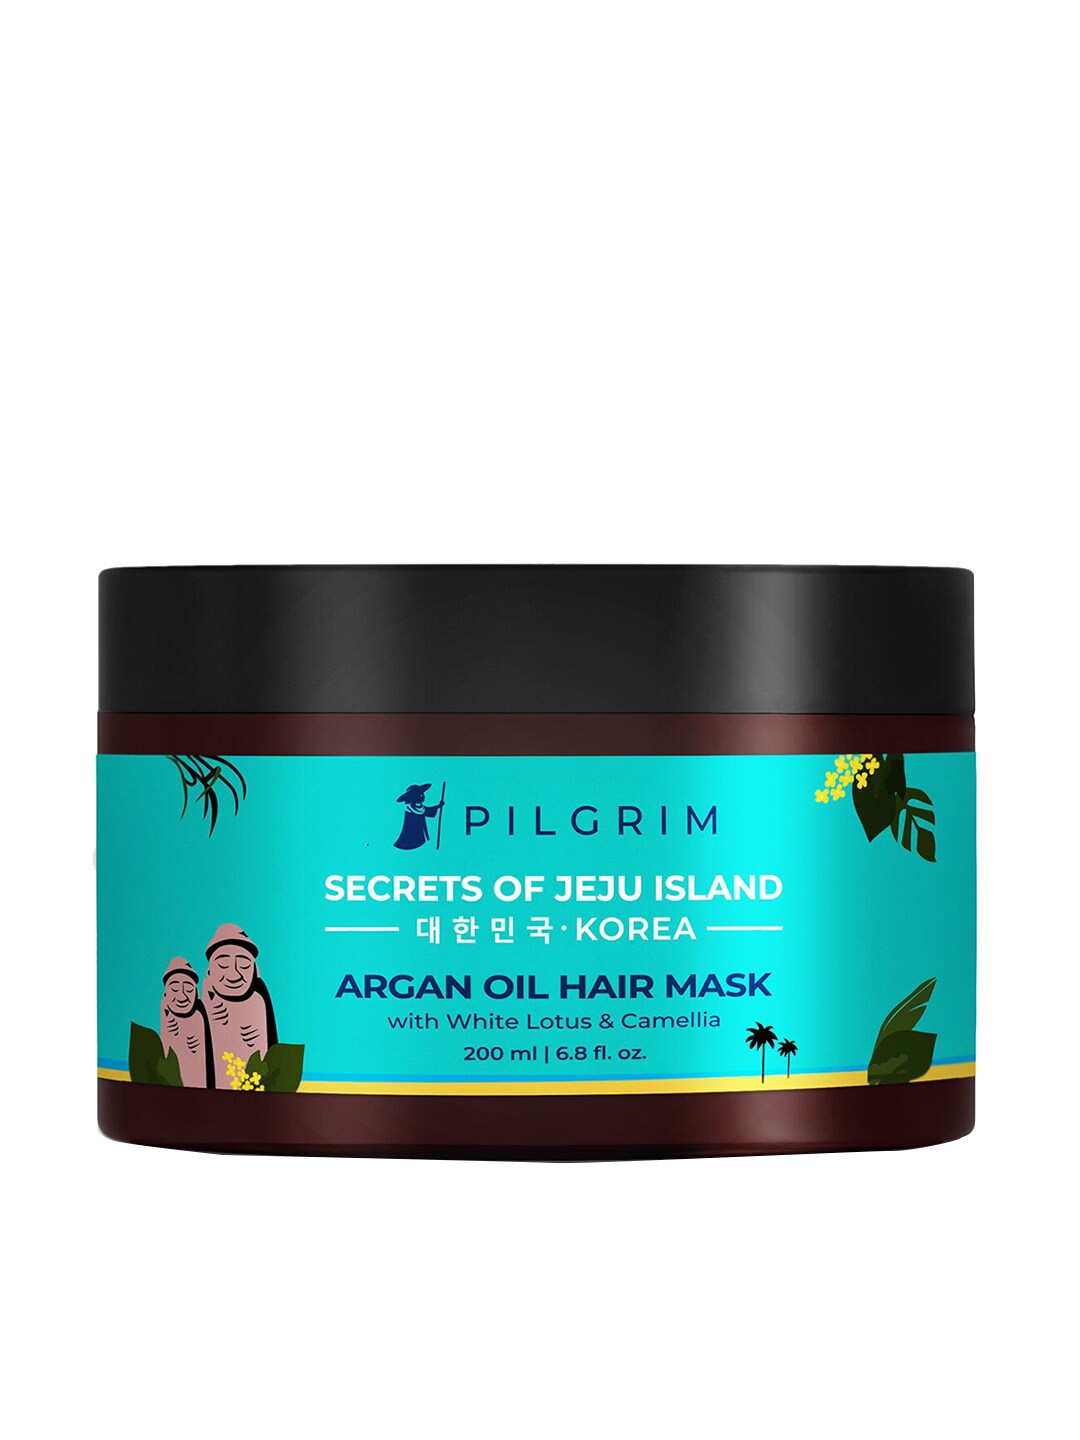 Pilgrim Argan Oil Hair Mask and Pack for Dry & Frizzy Hair and Hair Fall Control Price in India